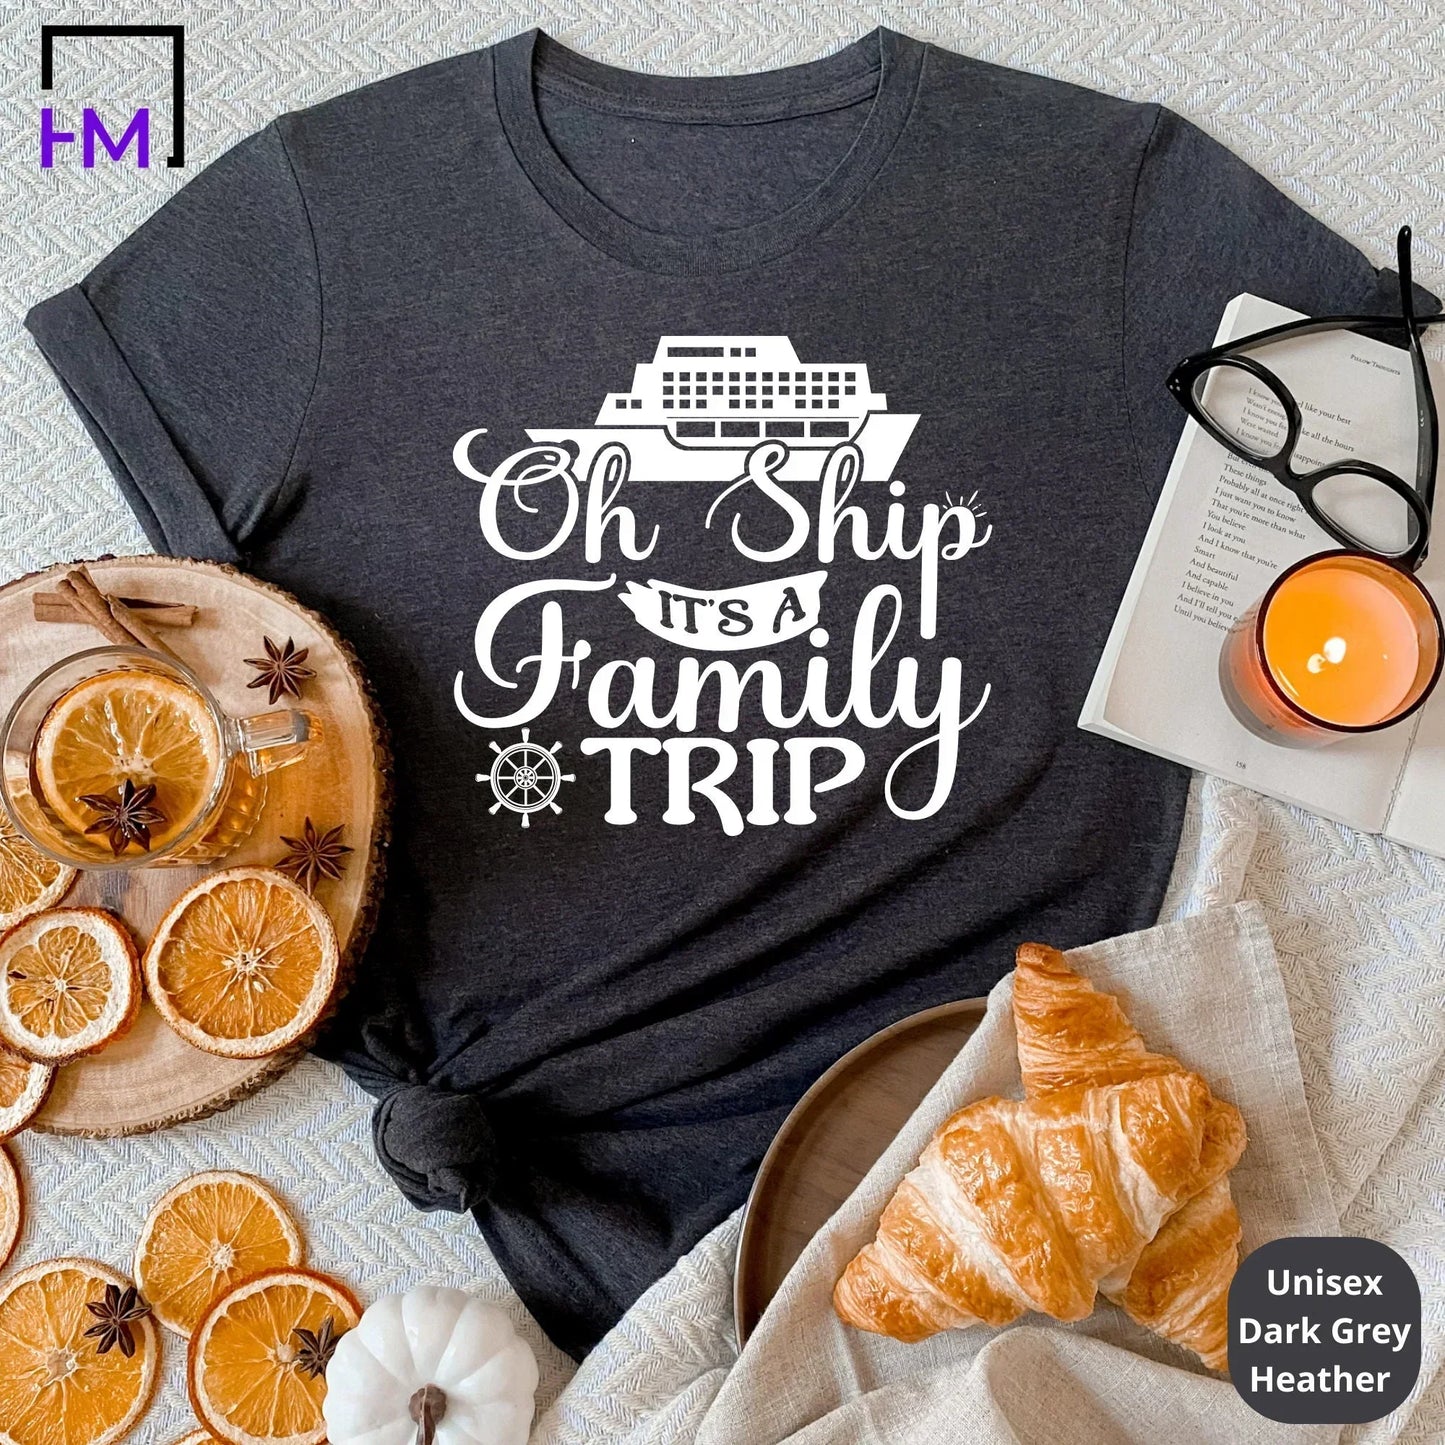 Oh Ship It's a Family Trip Cruise Shirts